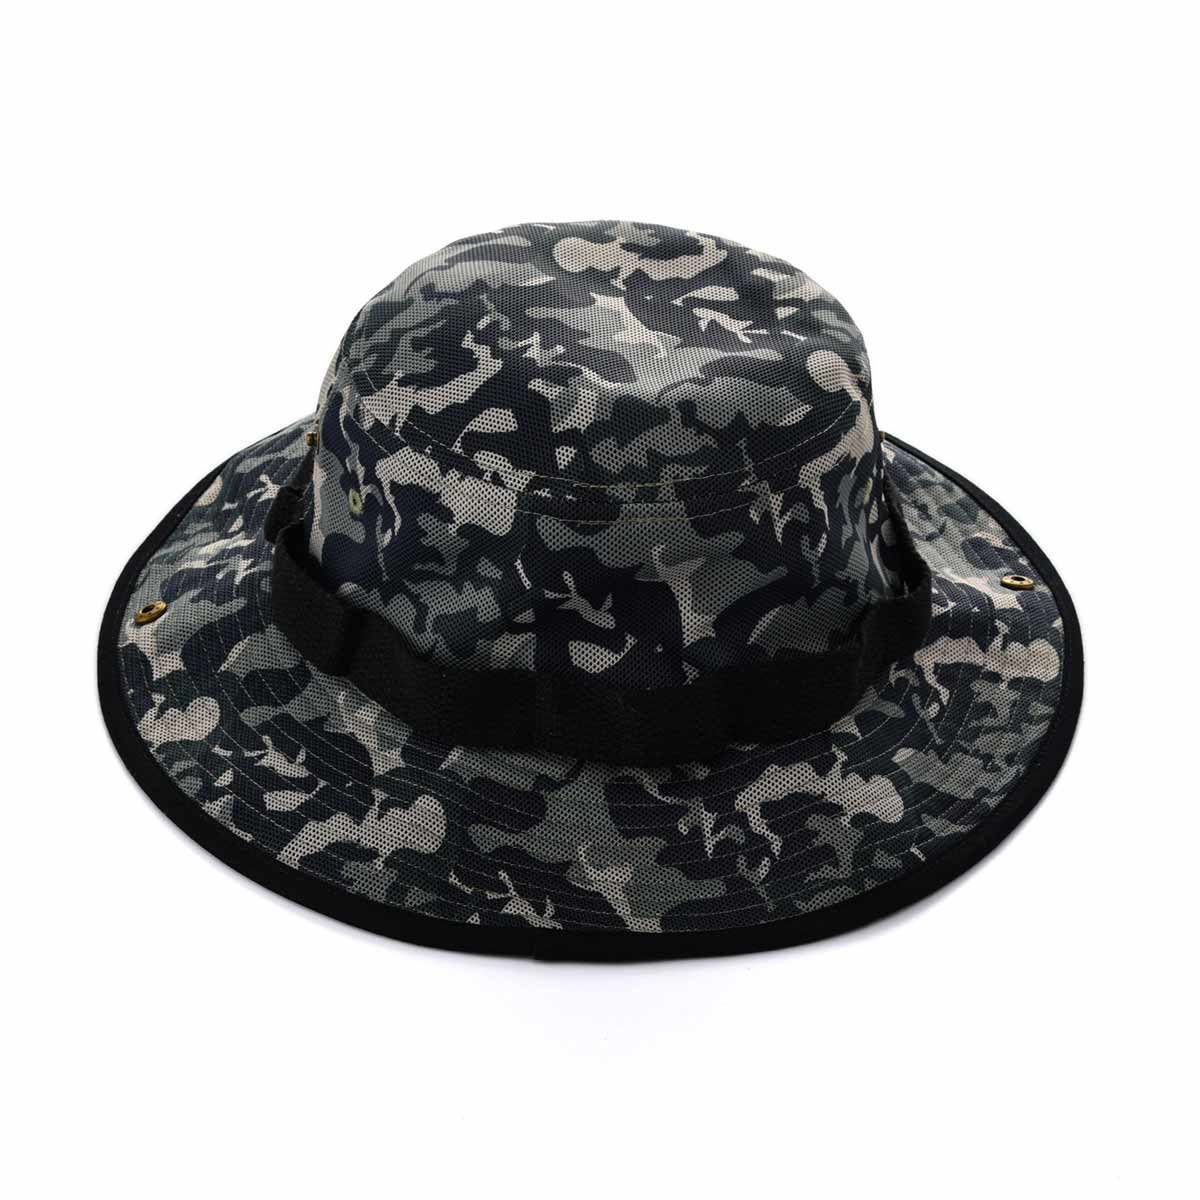 Aung-Crown-camo-bucket-hat-for-outdoors-SFG-210420-1